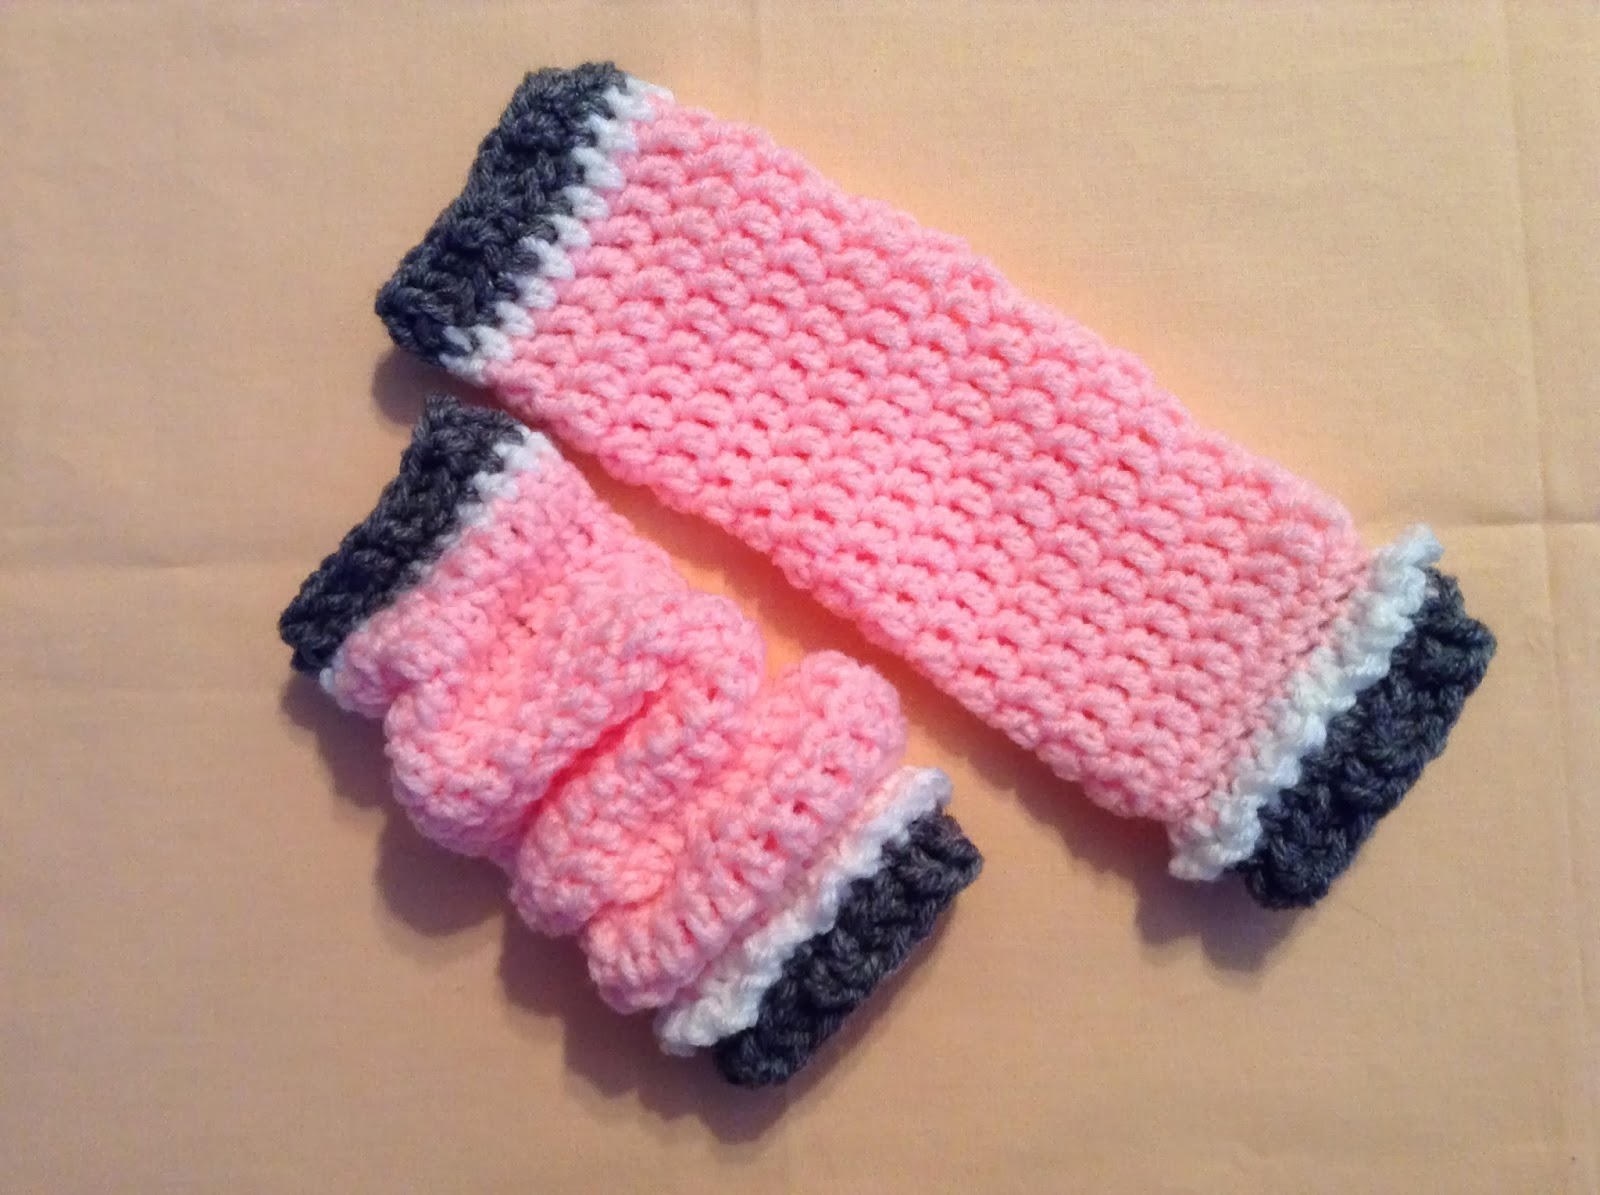 Free Crochet Leg Warmer Patterns The Shtick I Do Slouchy Leg Warmers For Infants With Pattern